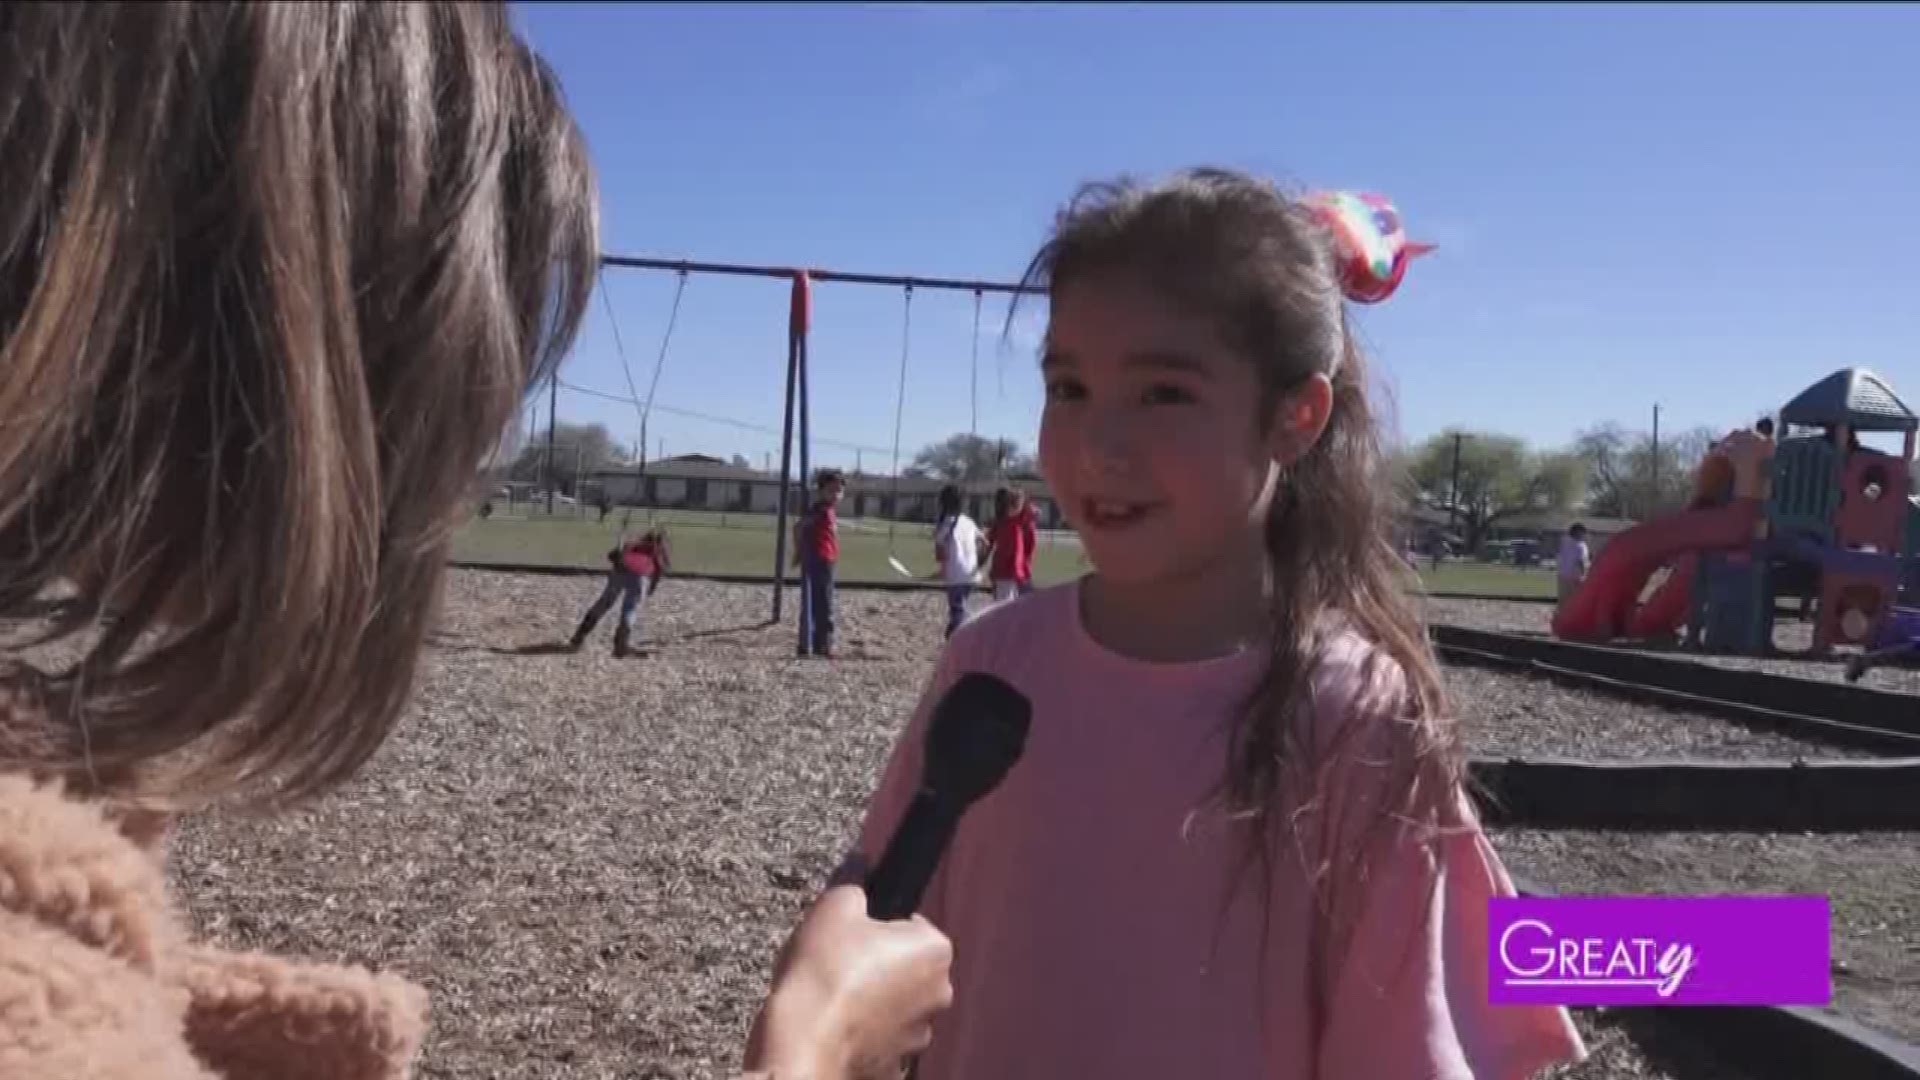 Kids tell us what they think love is